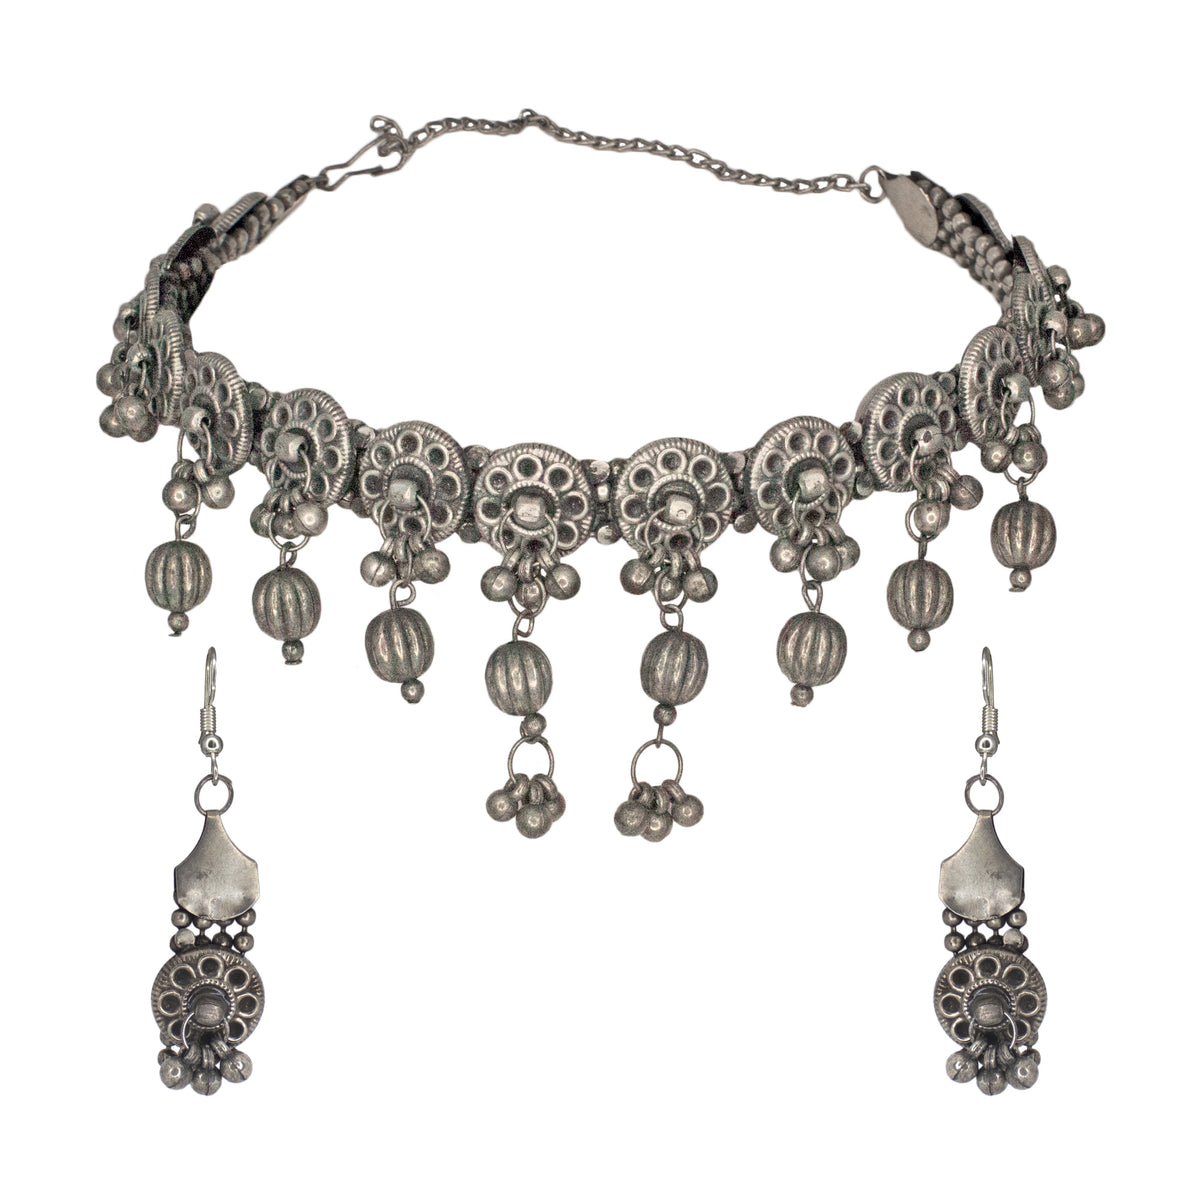 Abhinn Trendy Oxidised Antique Finish Floral Design With Hanging Beads Choker Set For Women